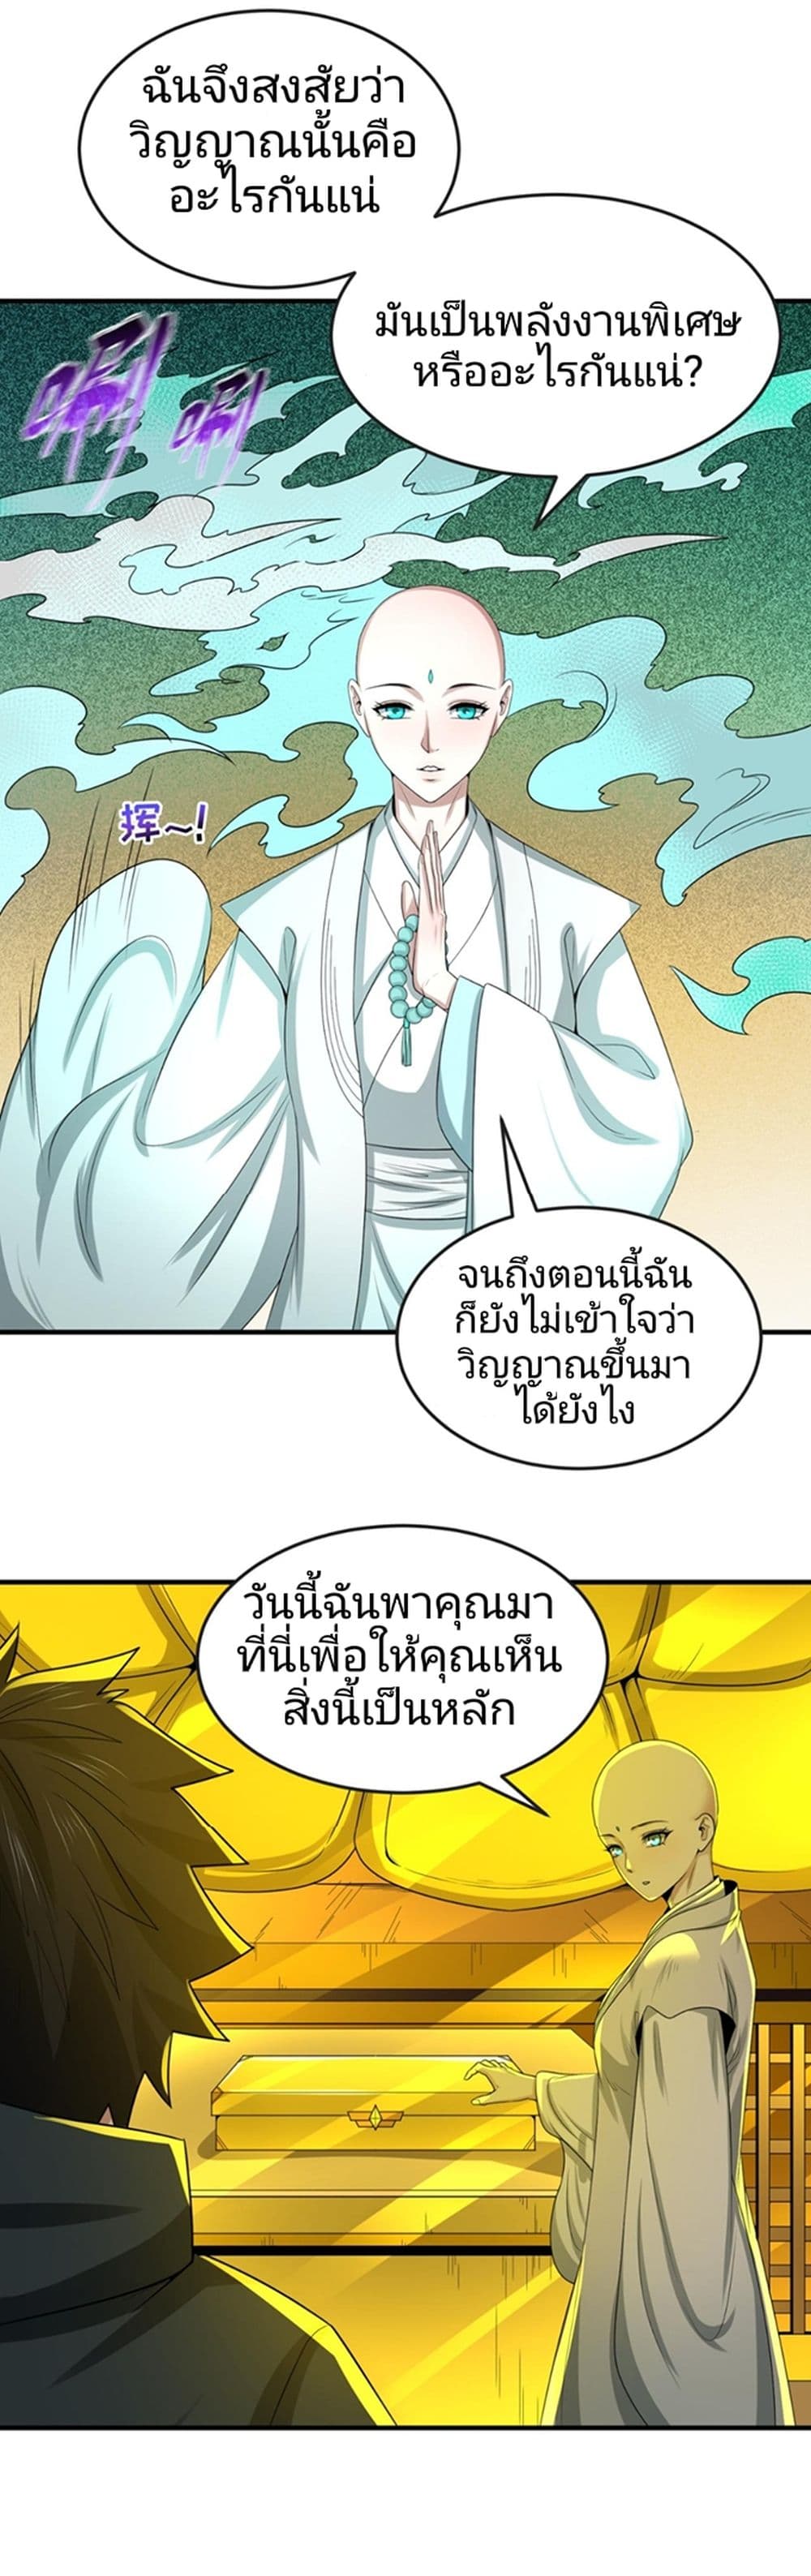 The Age of Ghost Spirits à¸à¸­à¸à¸à¸µà¹ 46 (9)